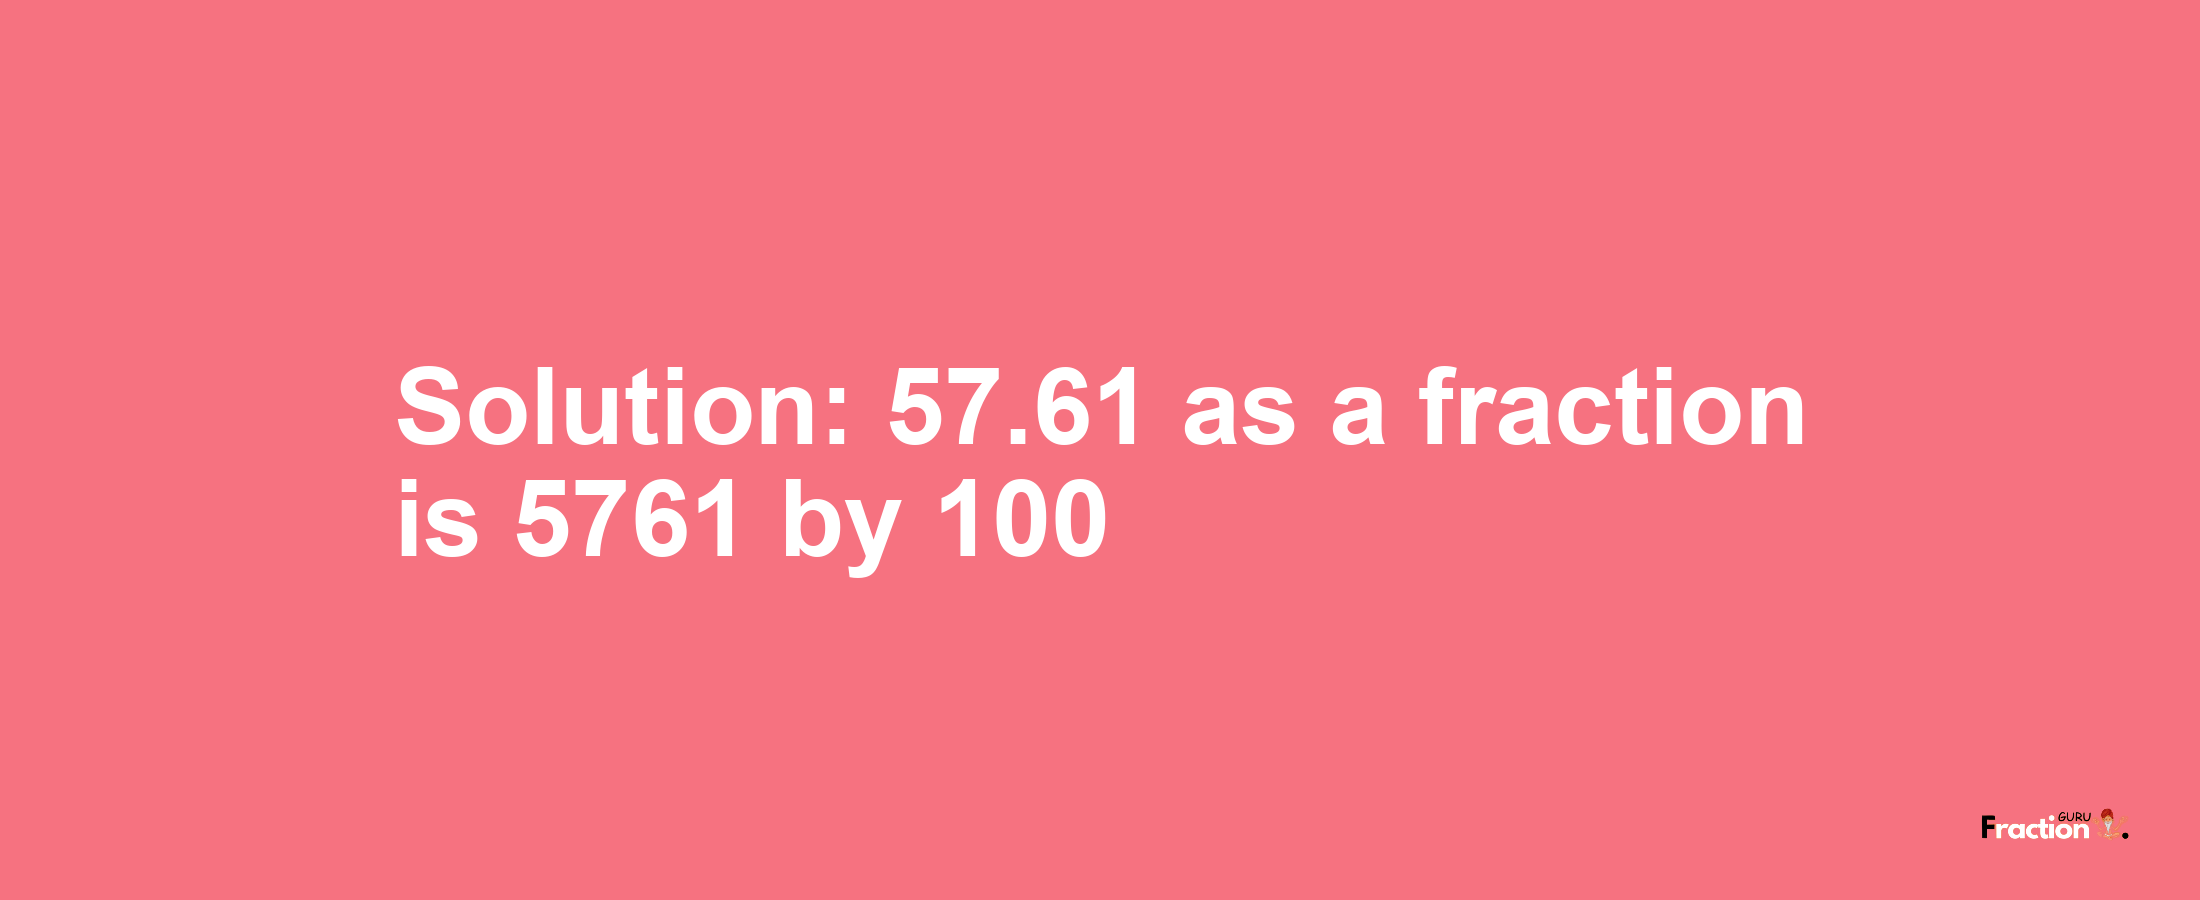 Solution:57.61 as a fraction is 5761/100